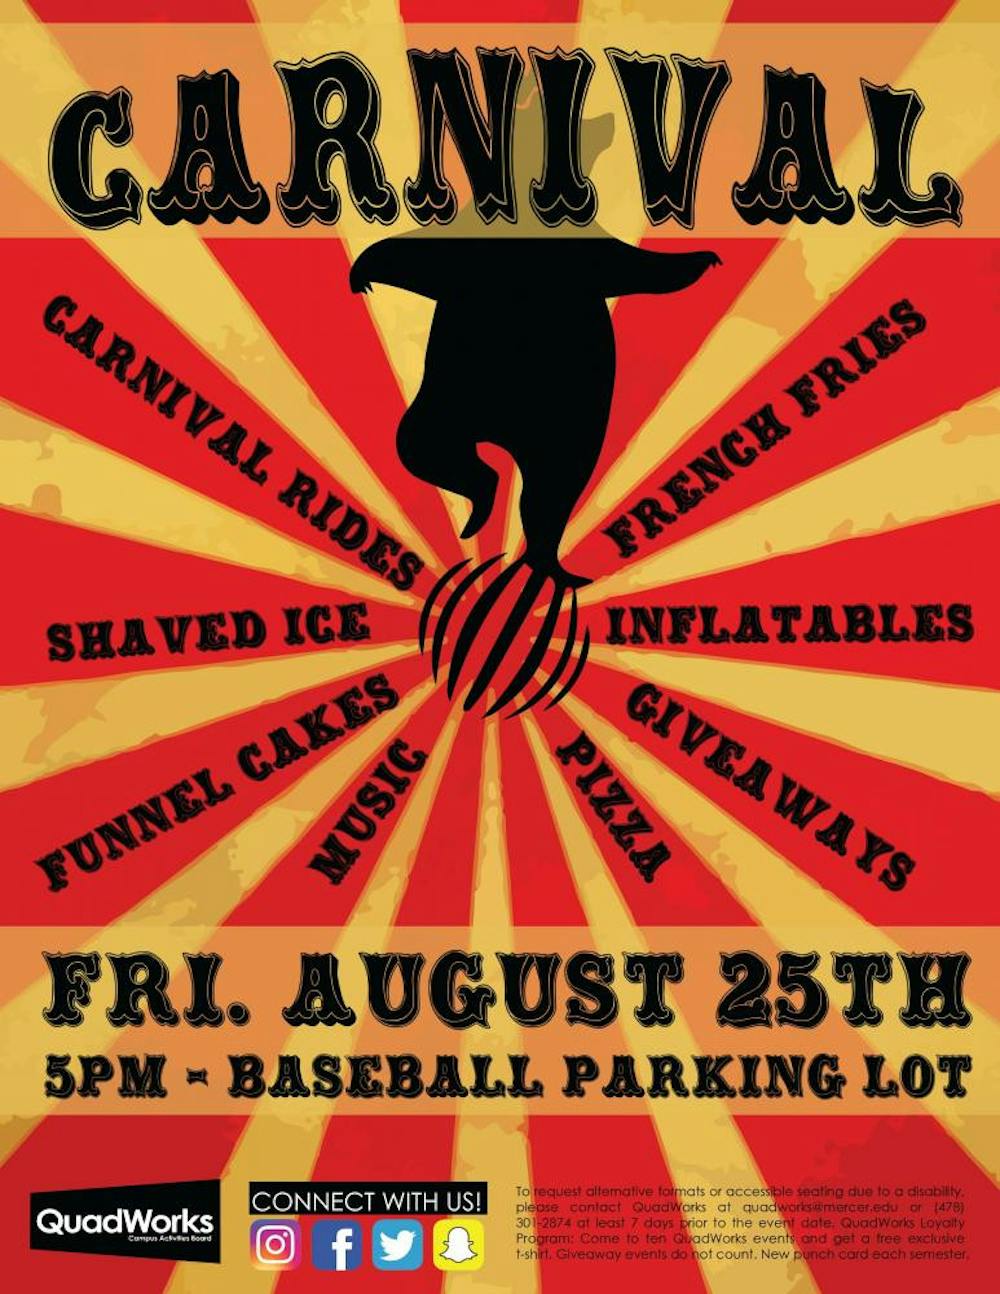 The carnival will feature ride, music and food according to the flyer created by Quadworks.